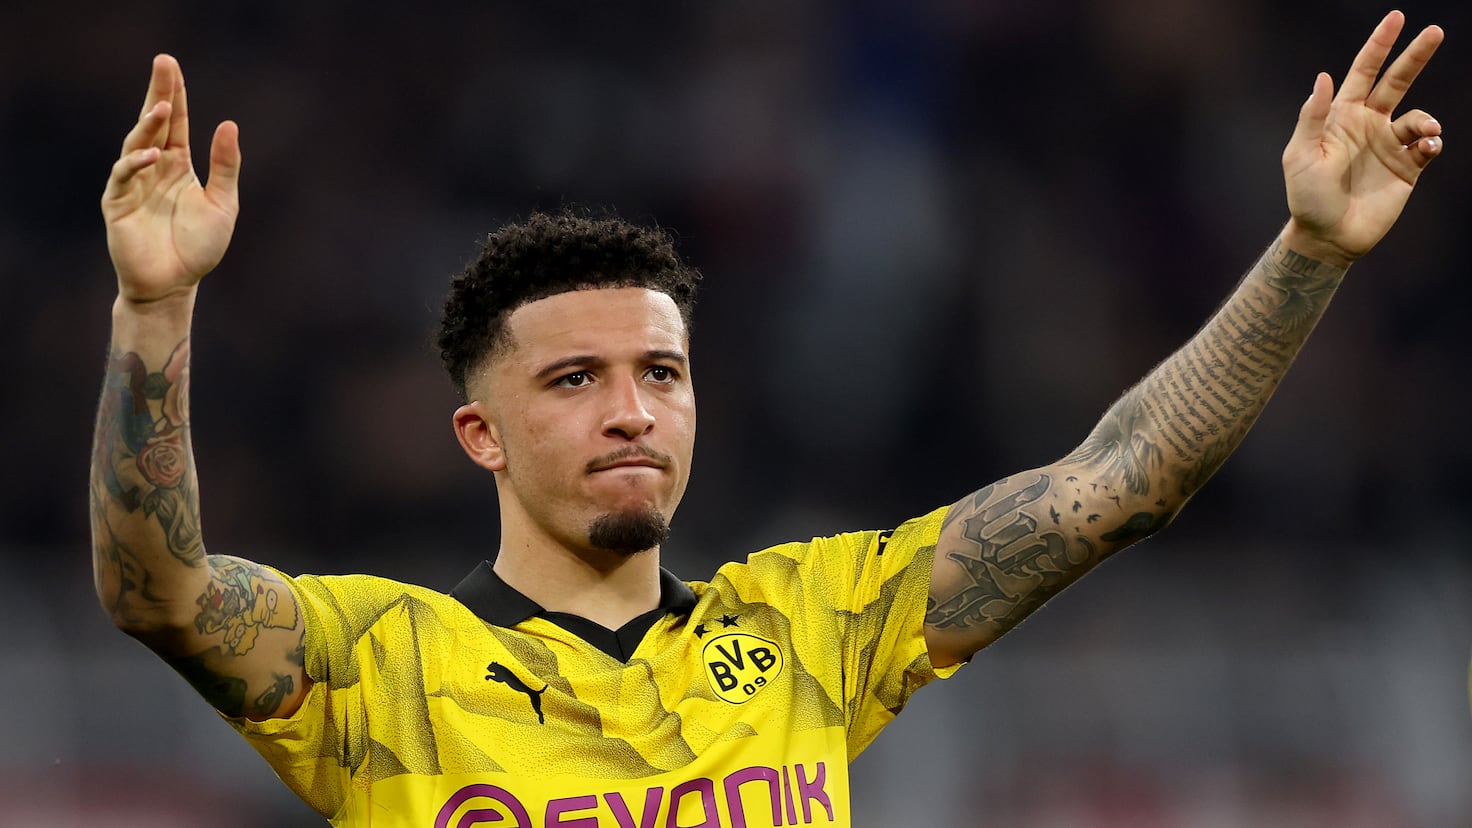 Jadon Sancho Shines: The Unquestionable Star in Dortmund's Champions League Victory Over PSG